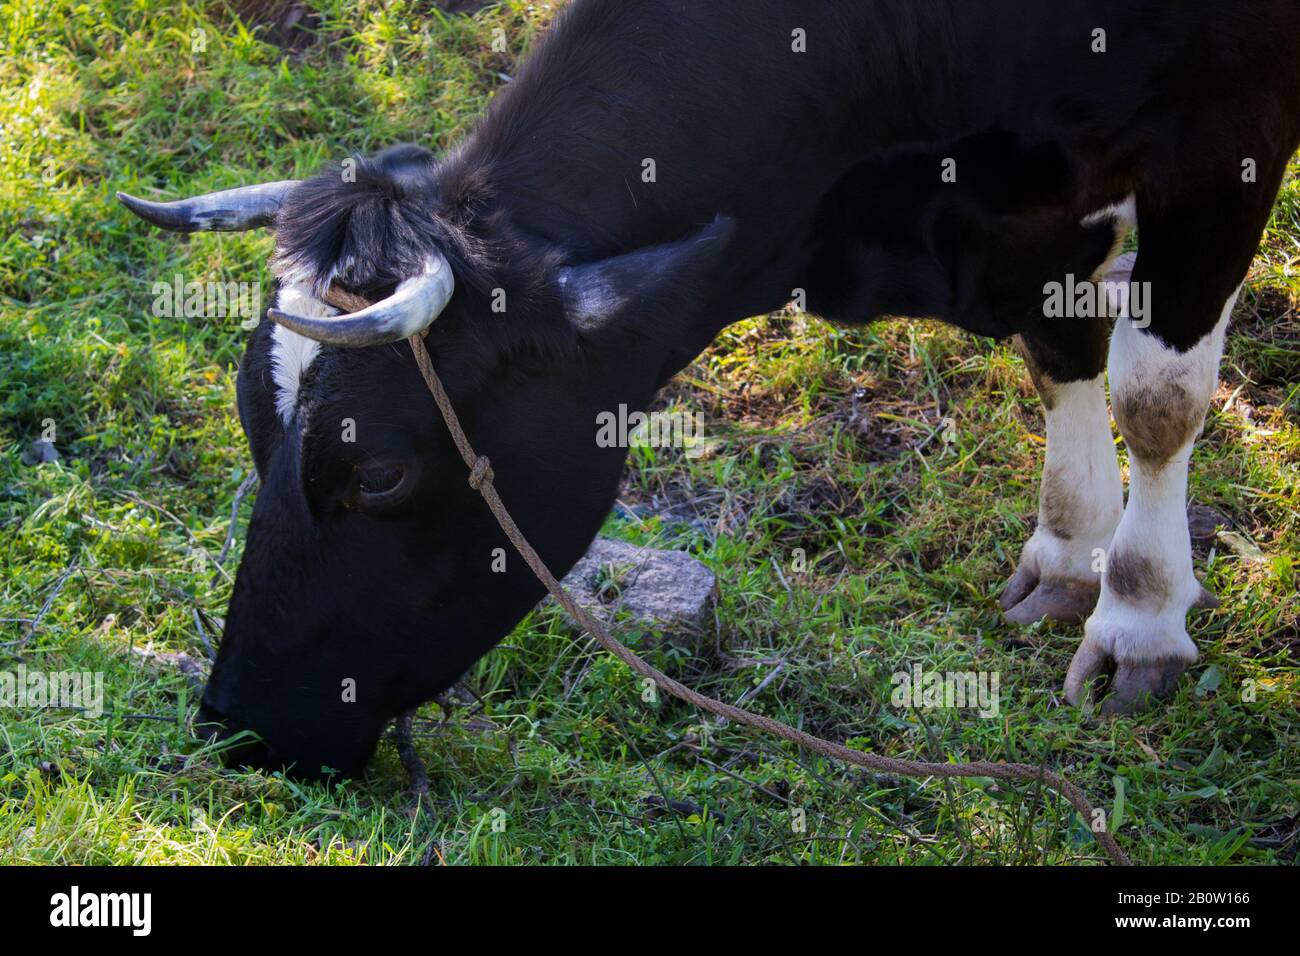 Half-body portrait of a cow grazing green grass, tied by a rope, calm Stock Photo